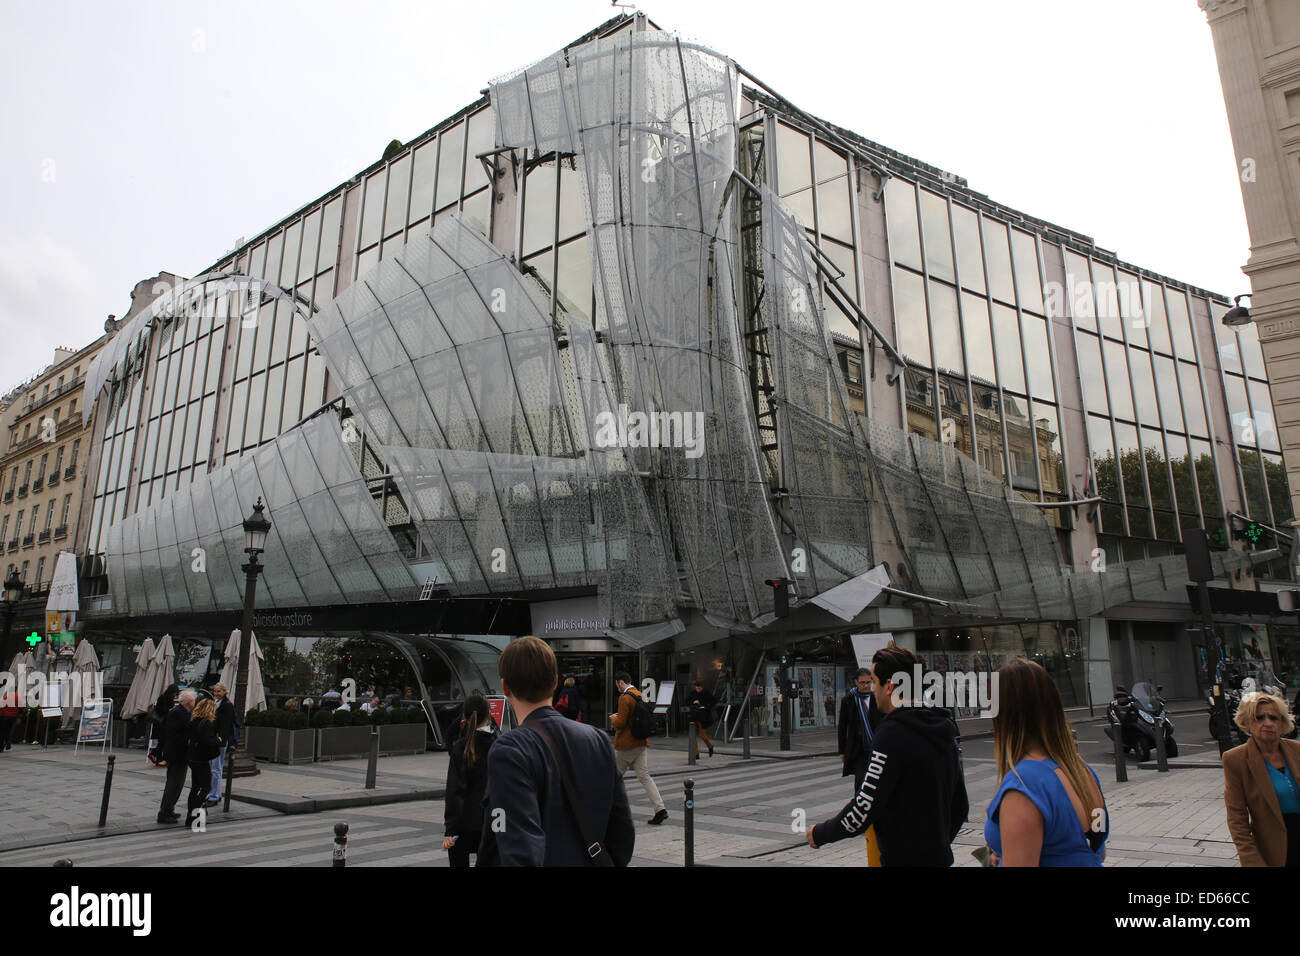 Paris shopping mall Champs Elysees Stock Photo - Alamy